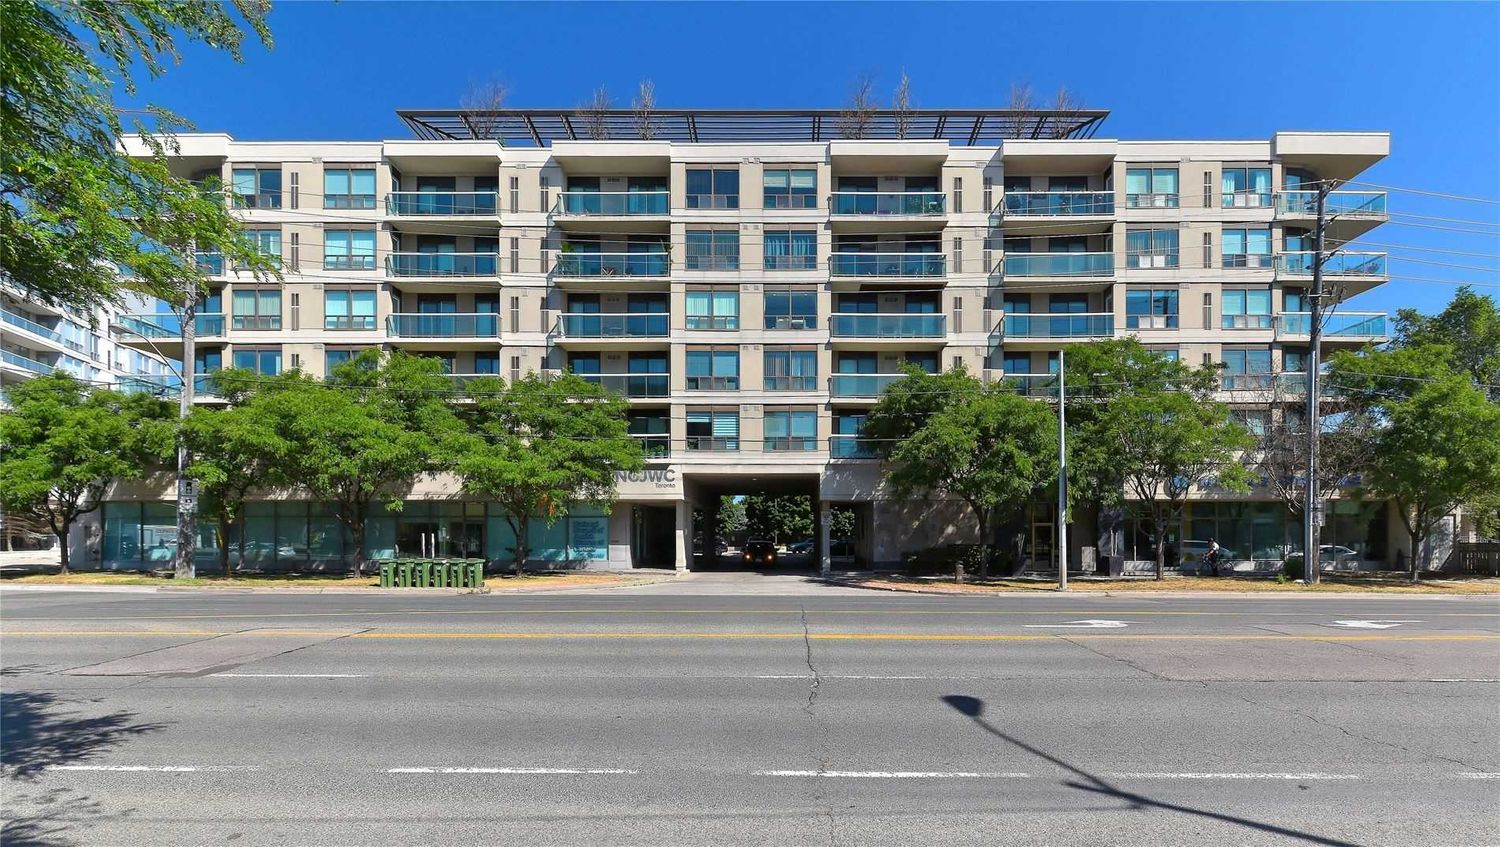 890 Sheppard Avenue W. Plaza Suites Condos is located in  North York, Toronto - image #2 of 3